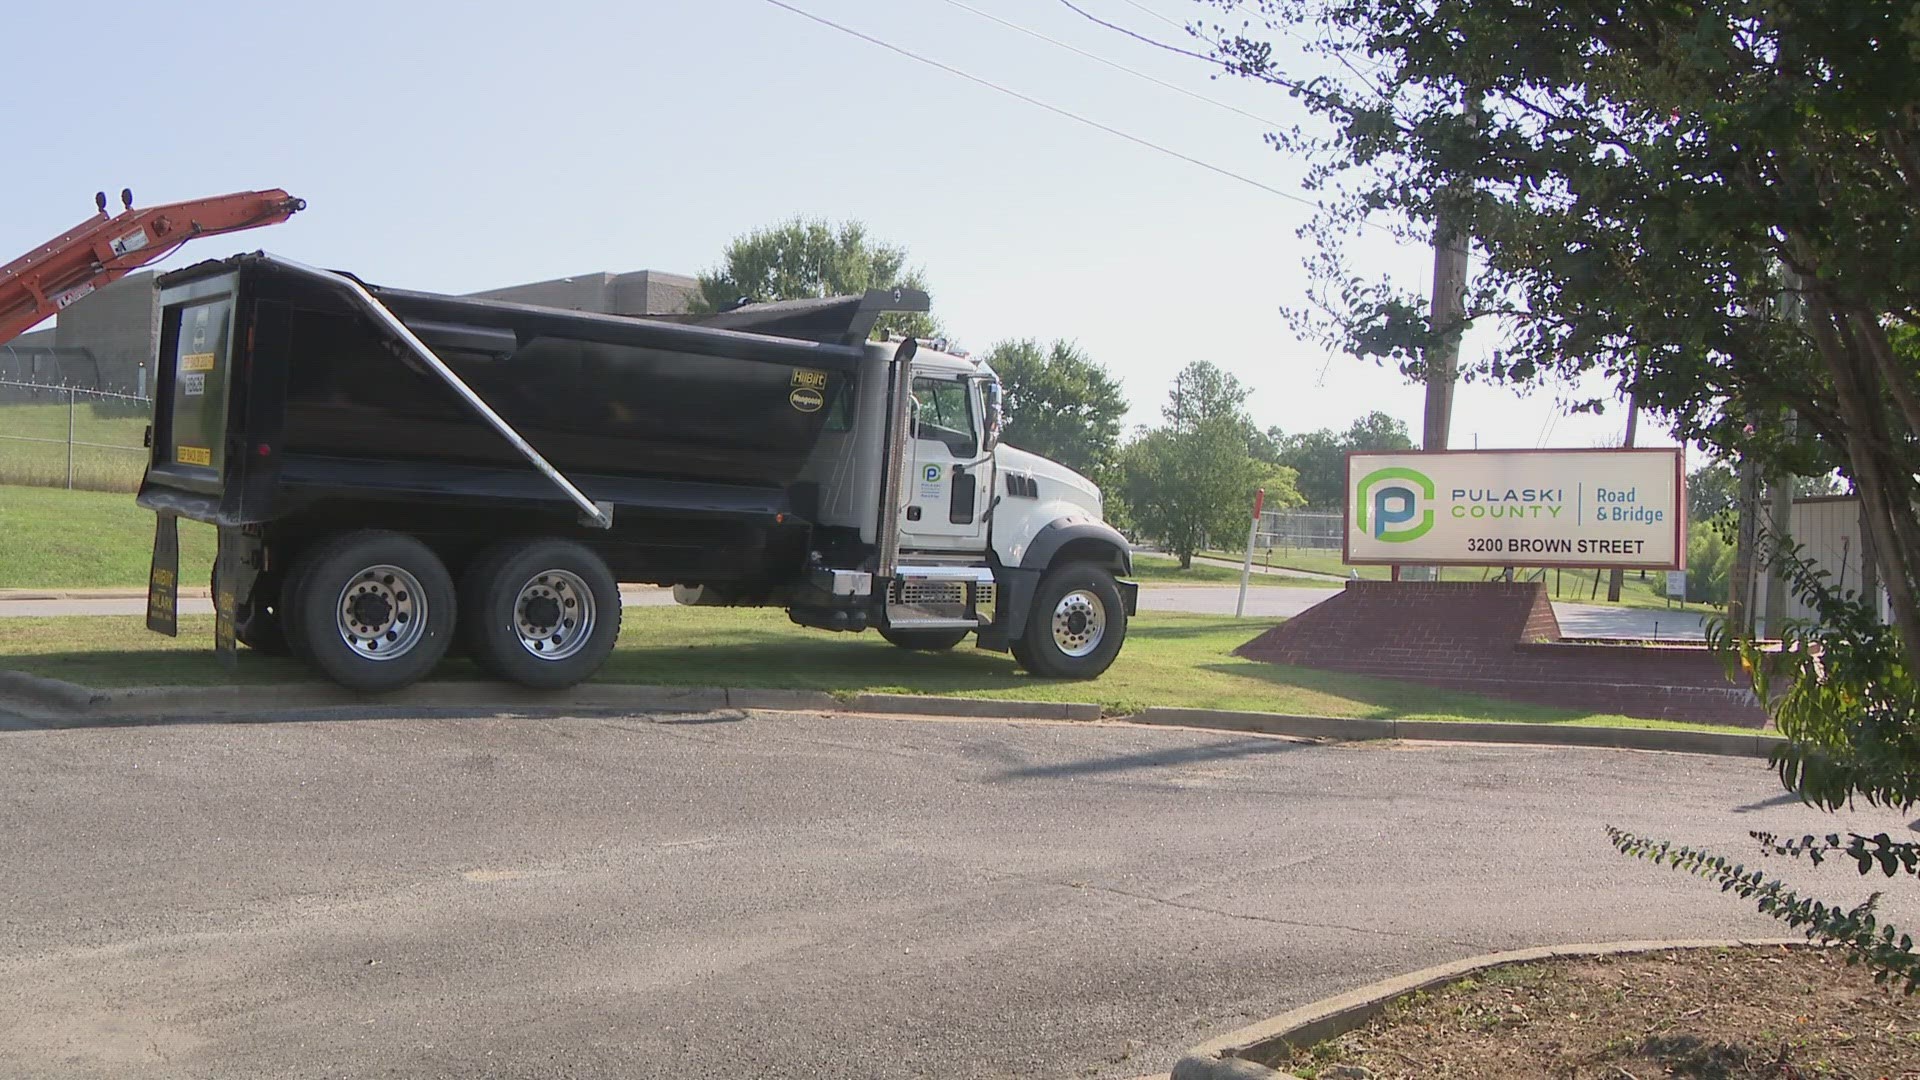 Pulaski County roads received a high rating, posting a pavement condition index rating of 83.7 which is one of the highest in Arkansas.